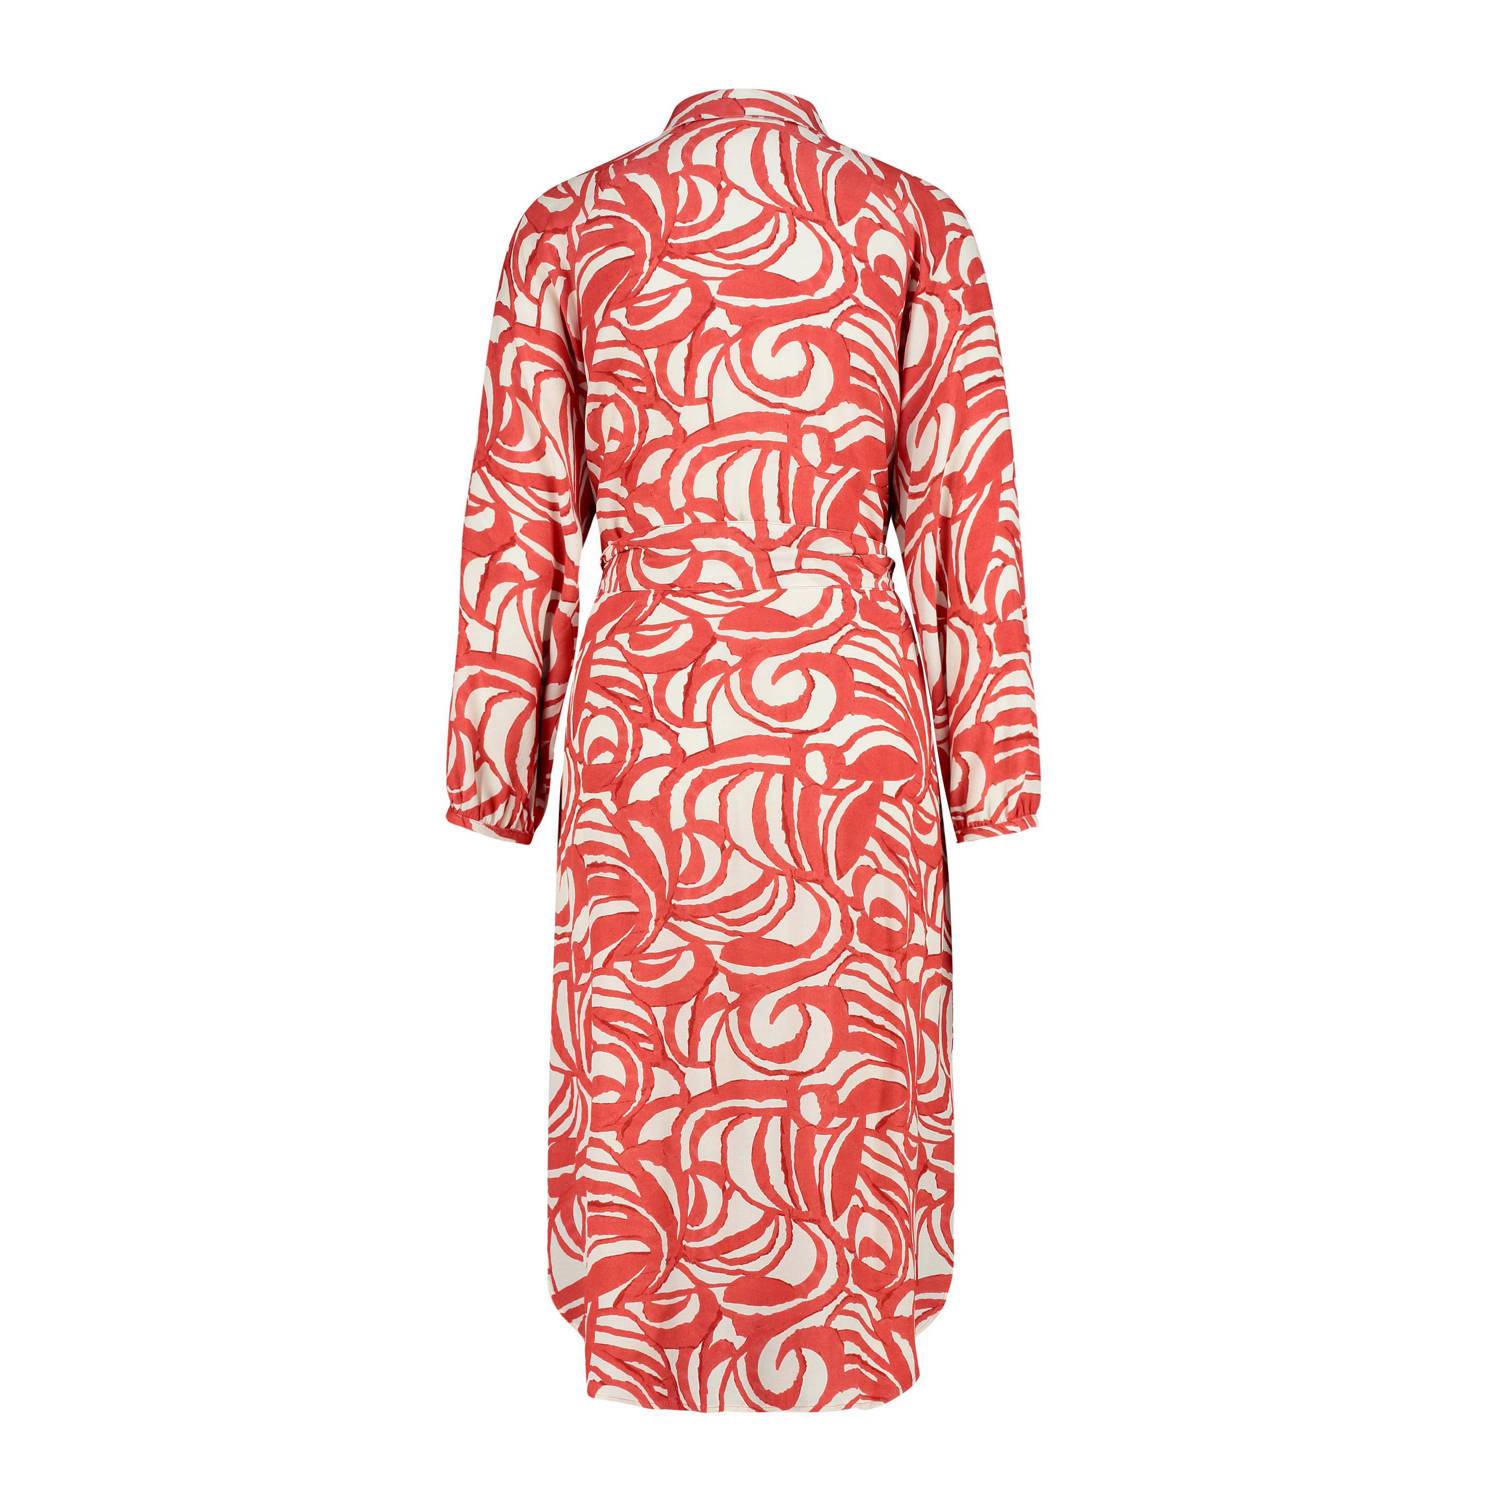 Expresso blousejurk met all over print rood wit